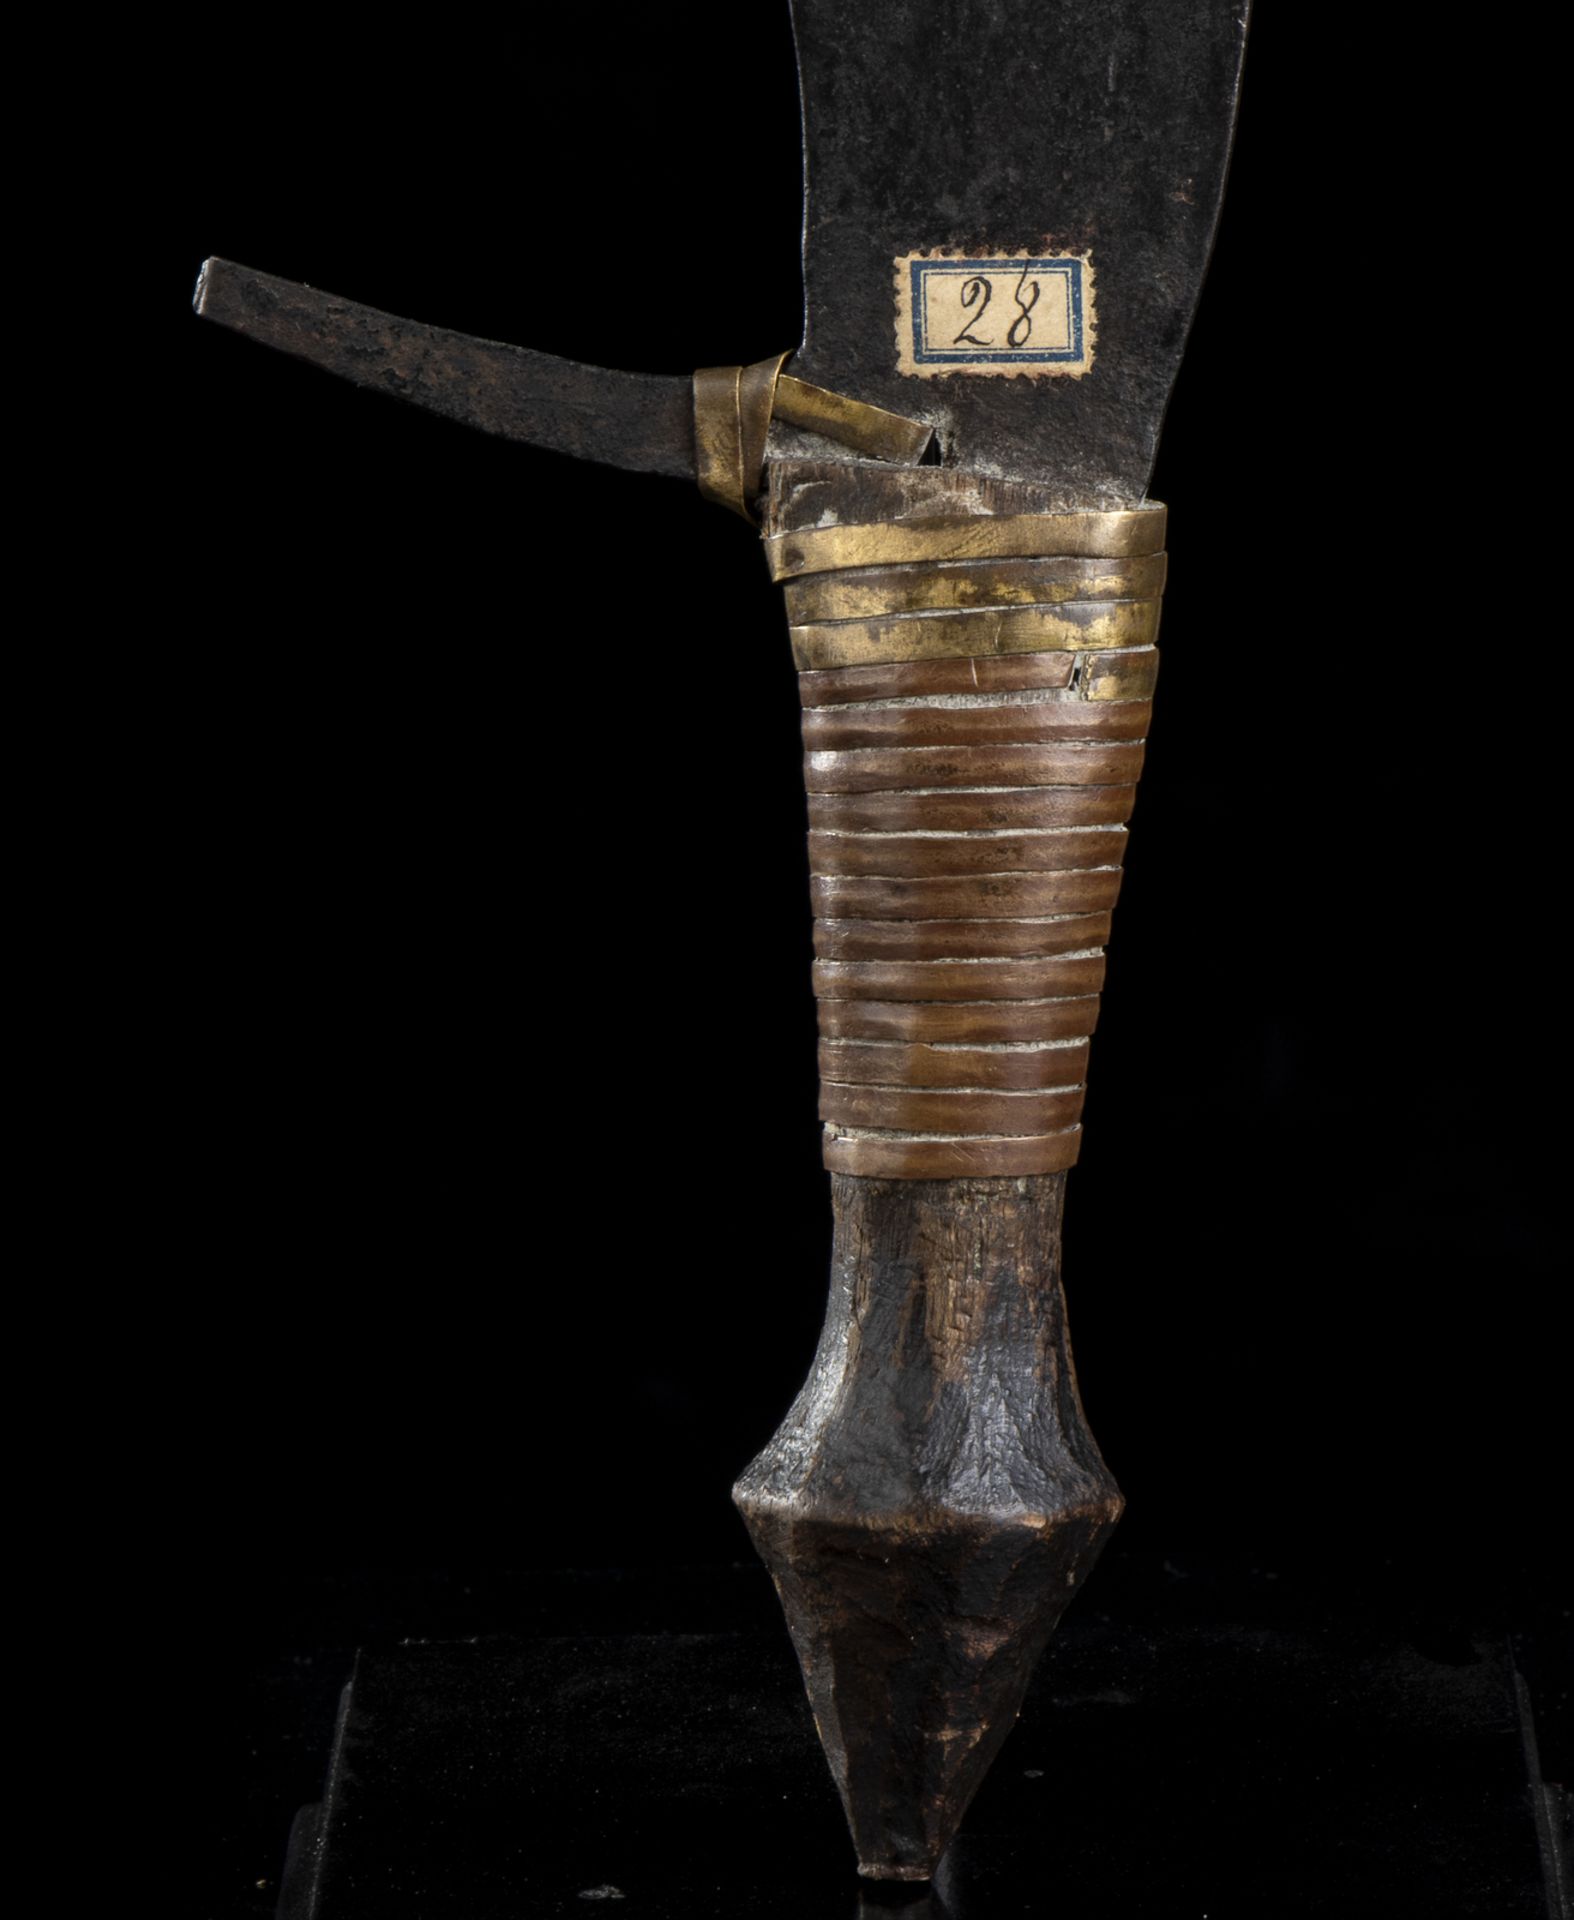 Gabon knife. Gabon, late 19th/early 20th century - Image 2 of 2